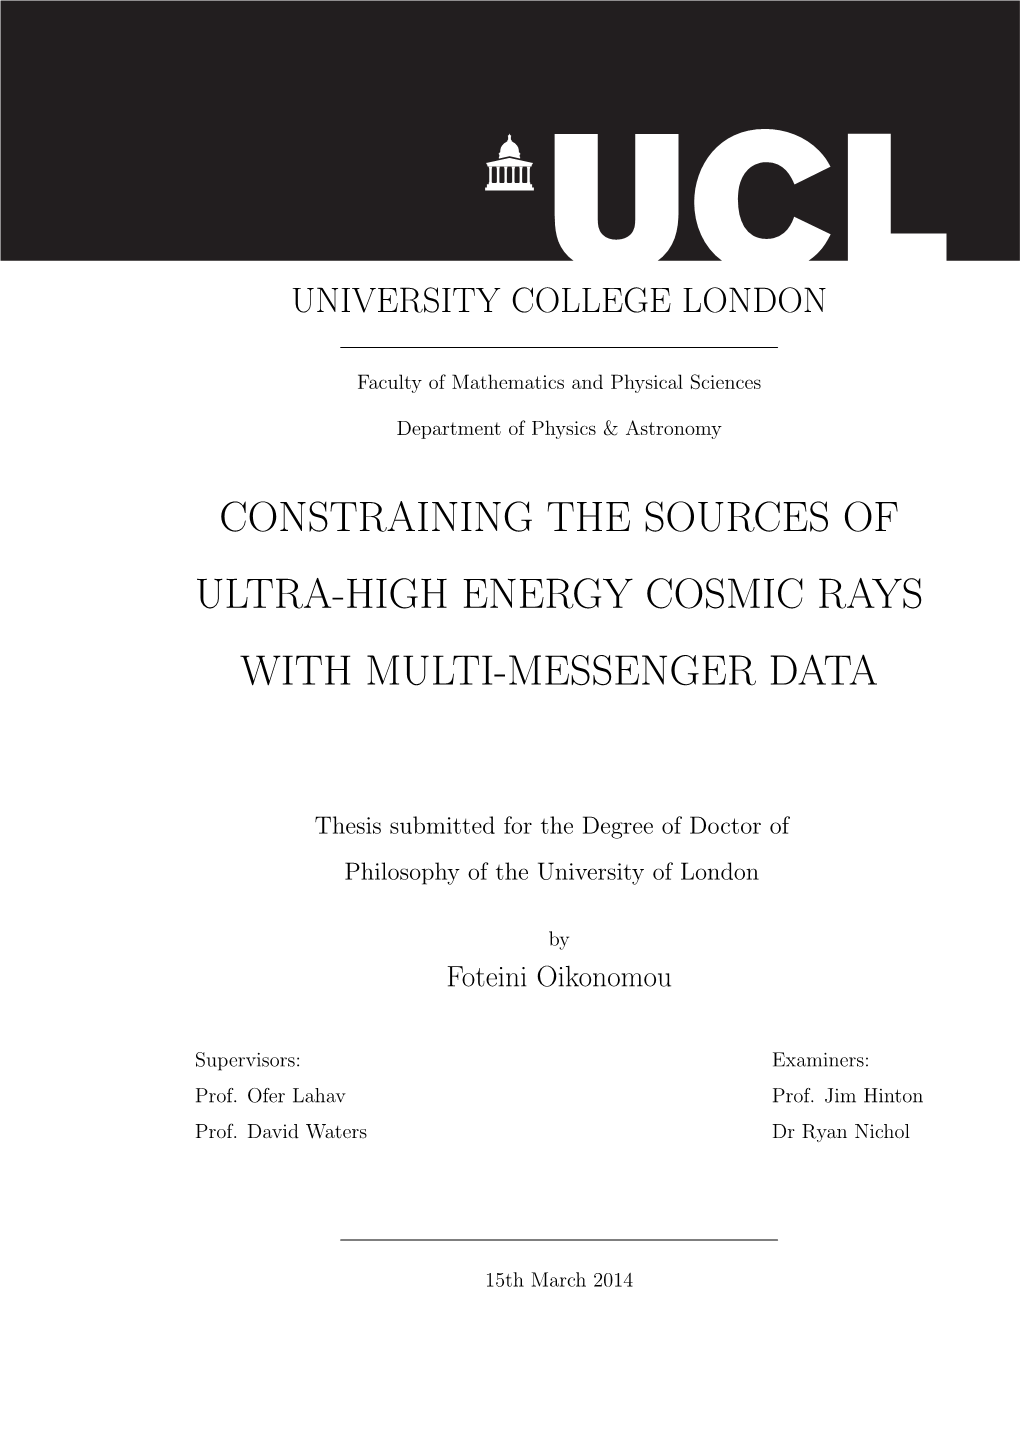 Constraining the Sources of Ultra-High Energy Cosmic Rays with Multi-Messenger Data